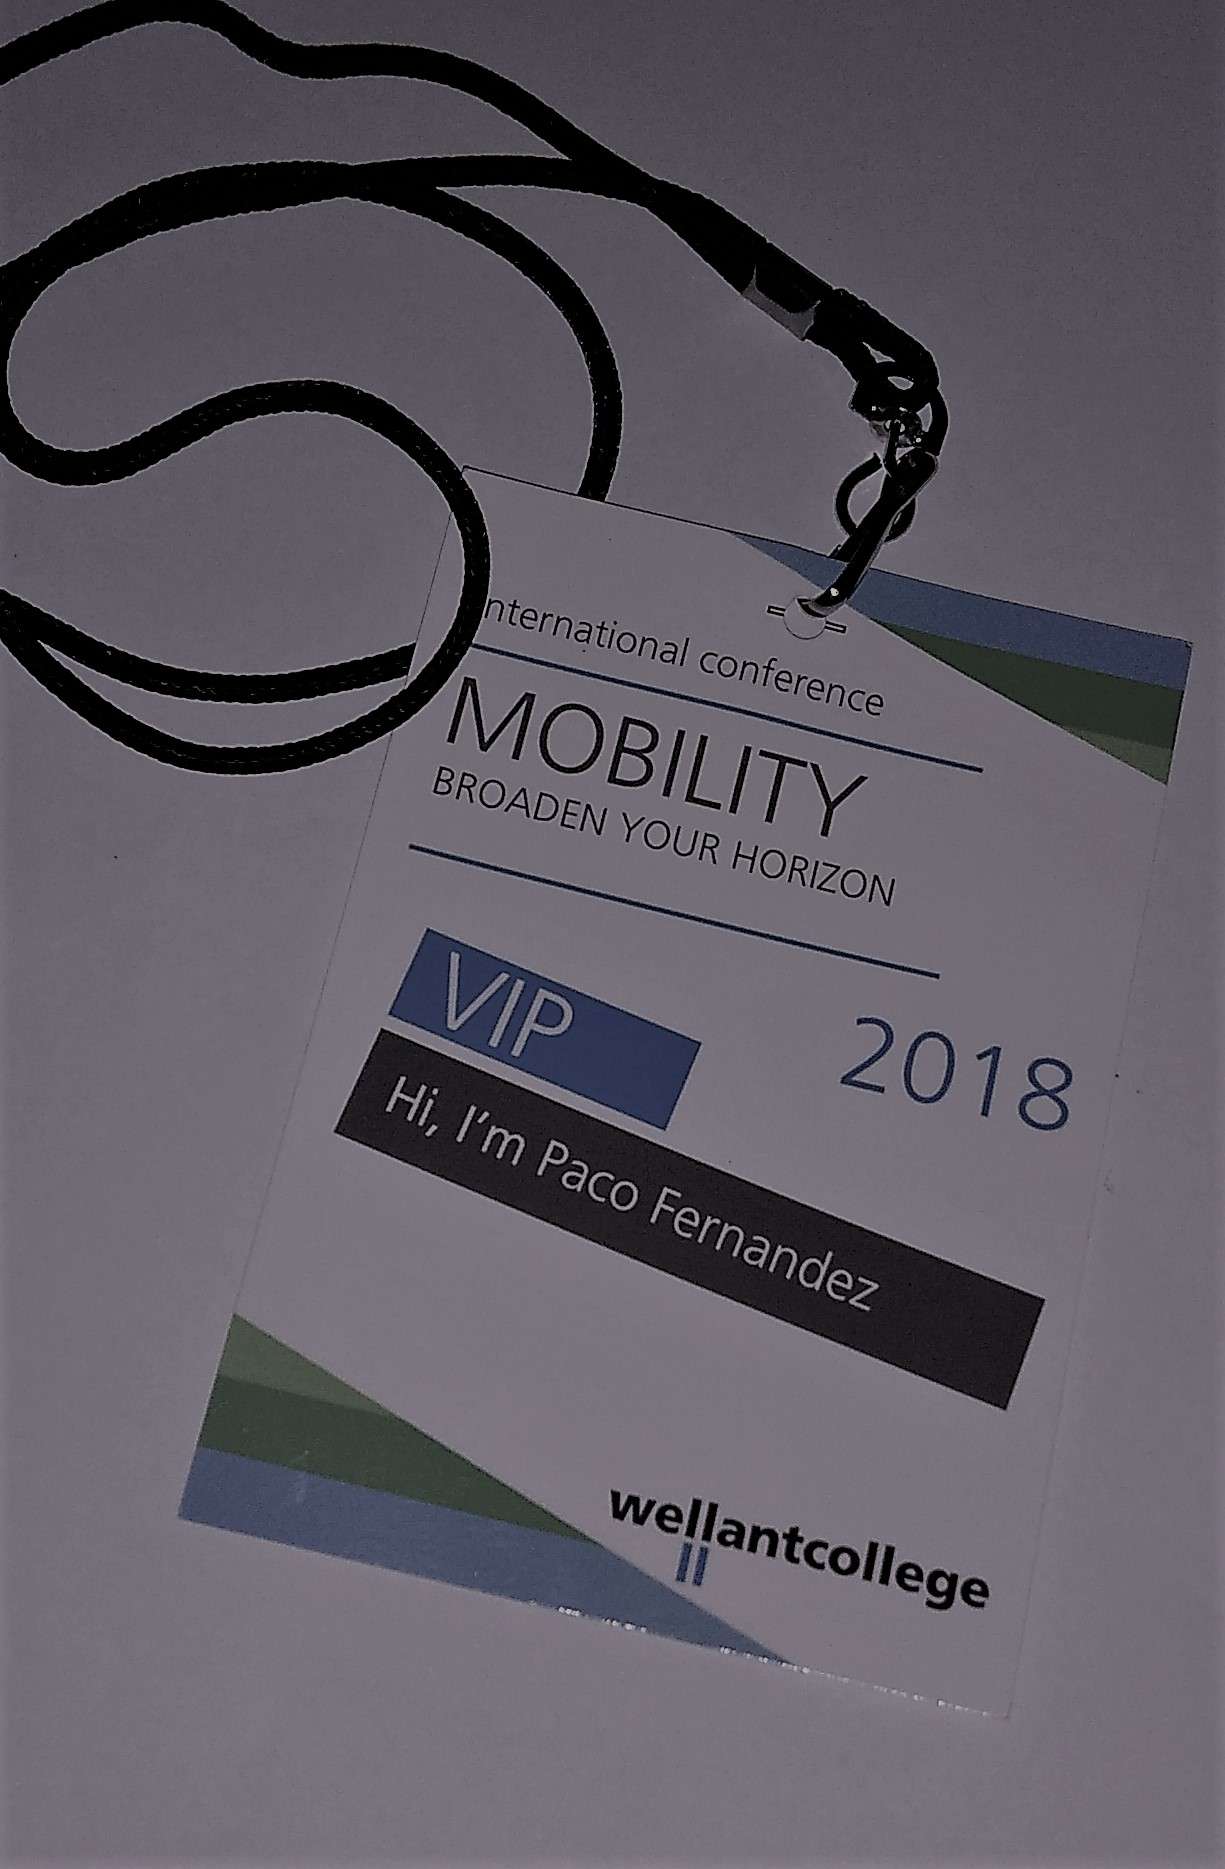 Mobility Conference Wellant